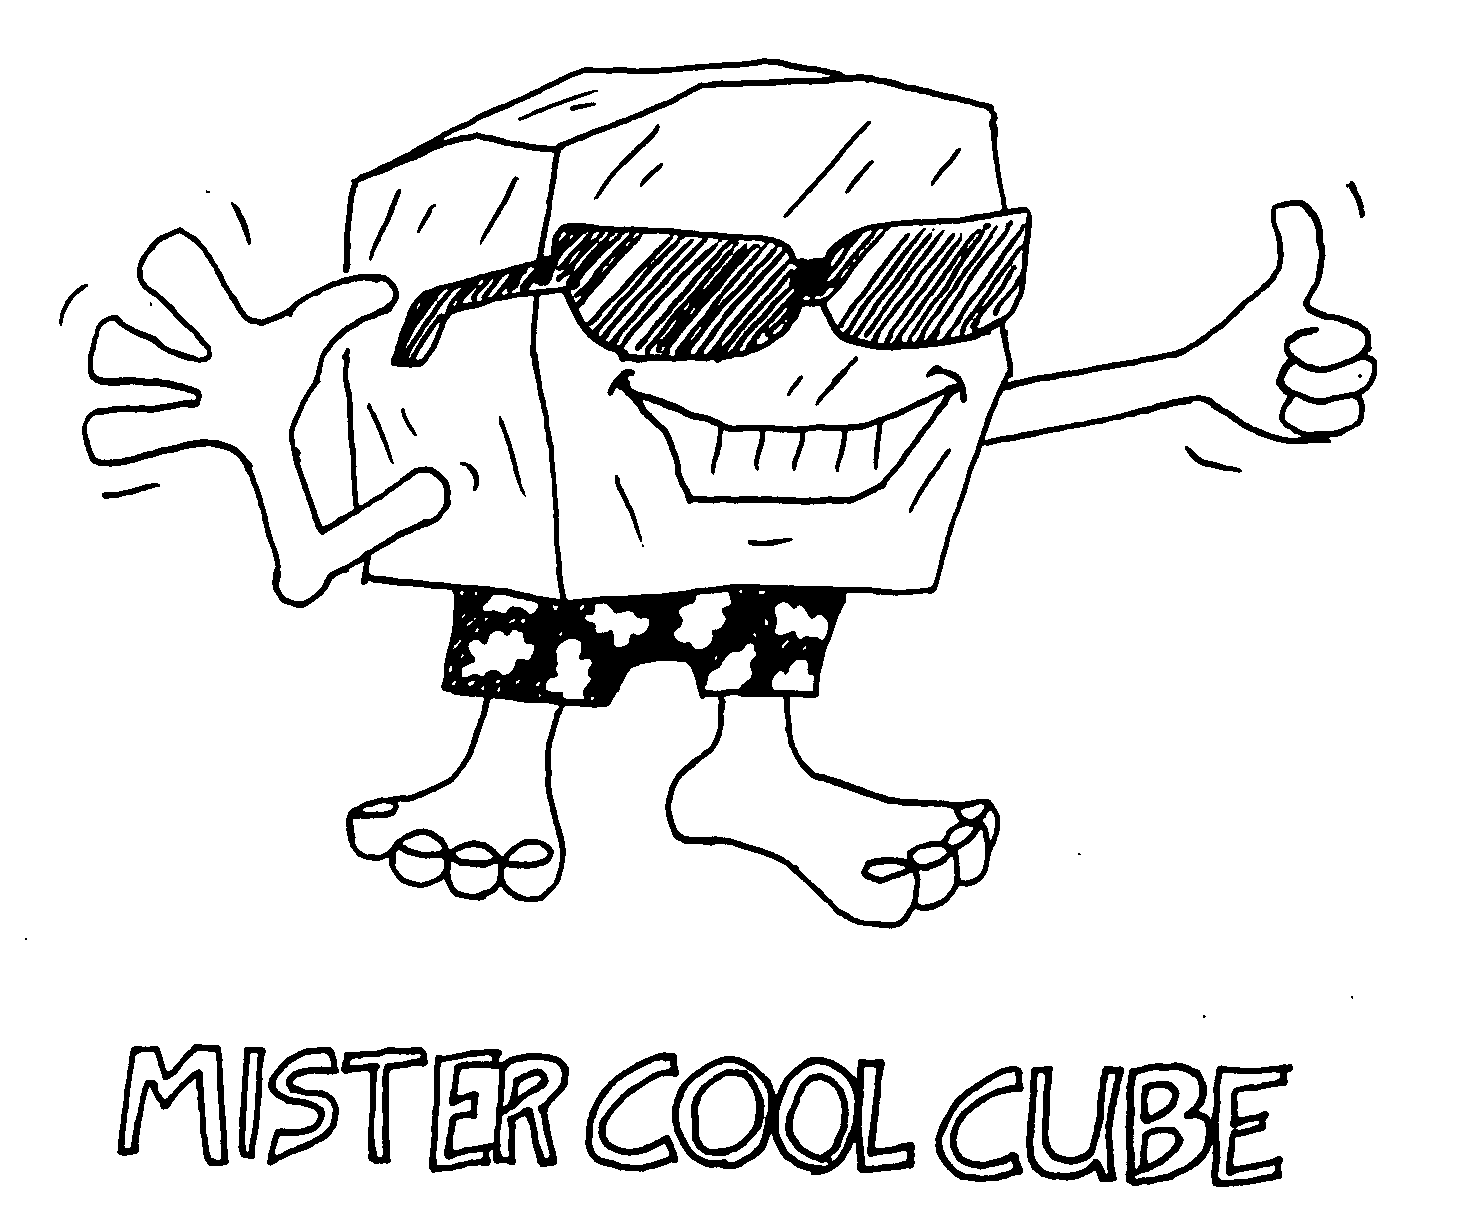  MISTER COOL CUBE